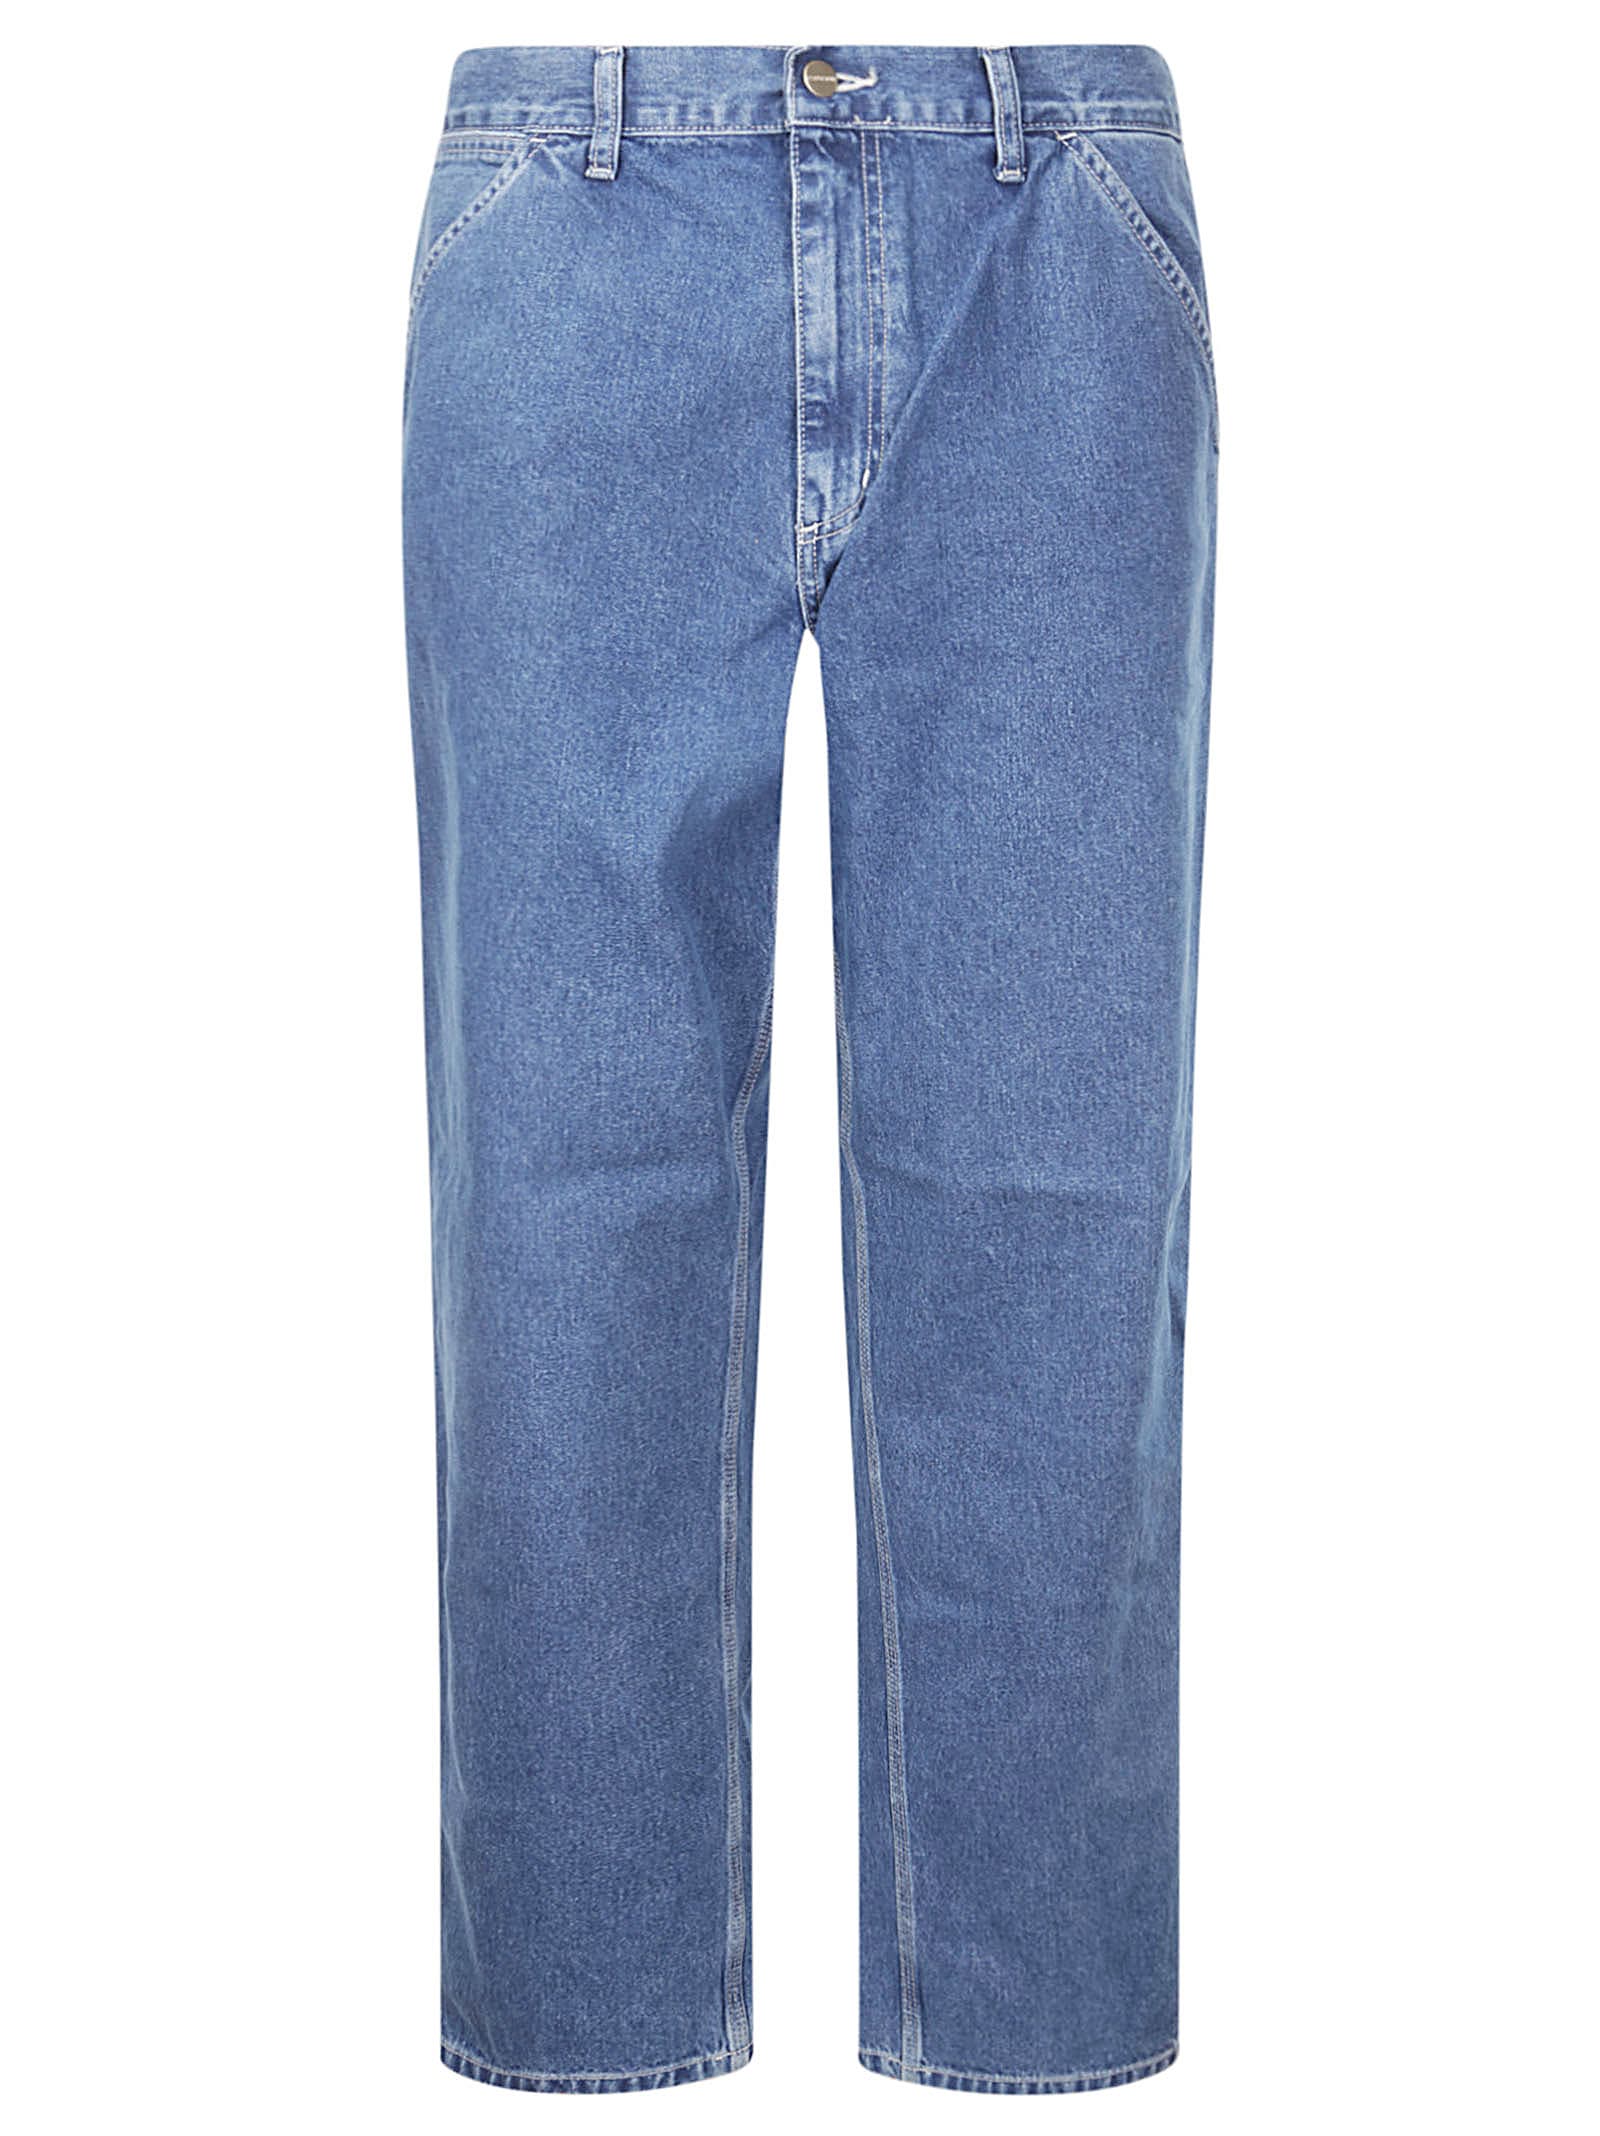 Carhartt Simple Pant In Blue Stone Washed